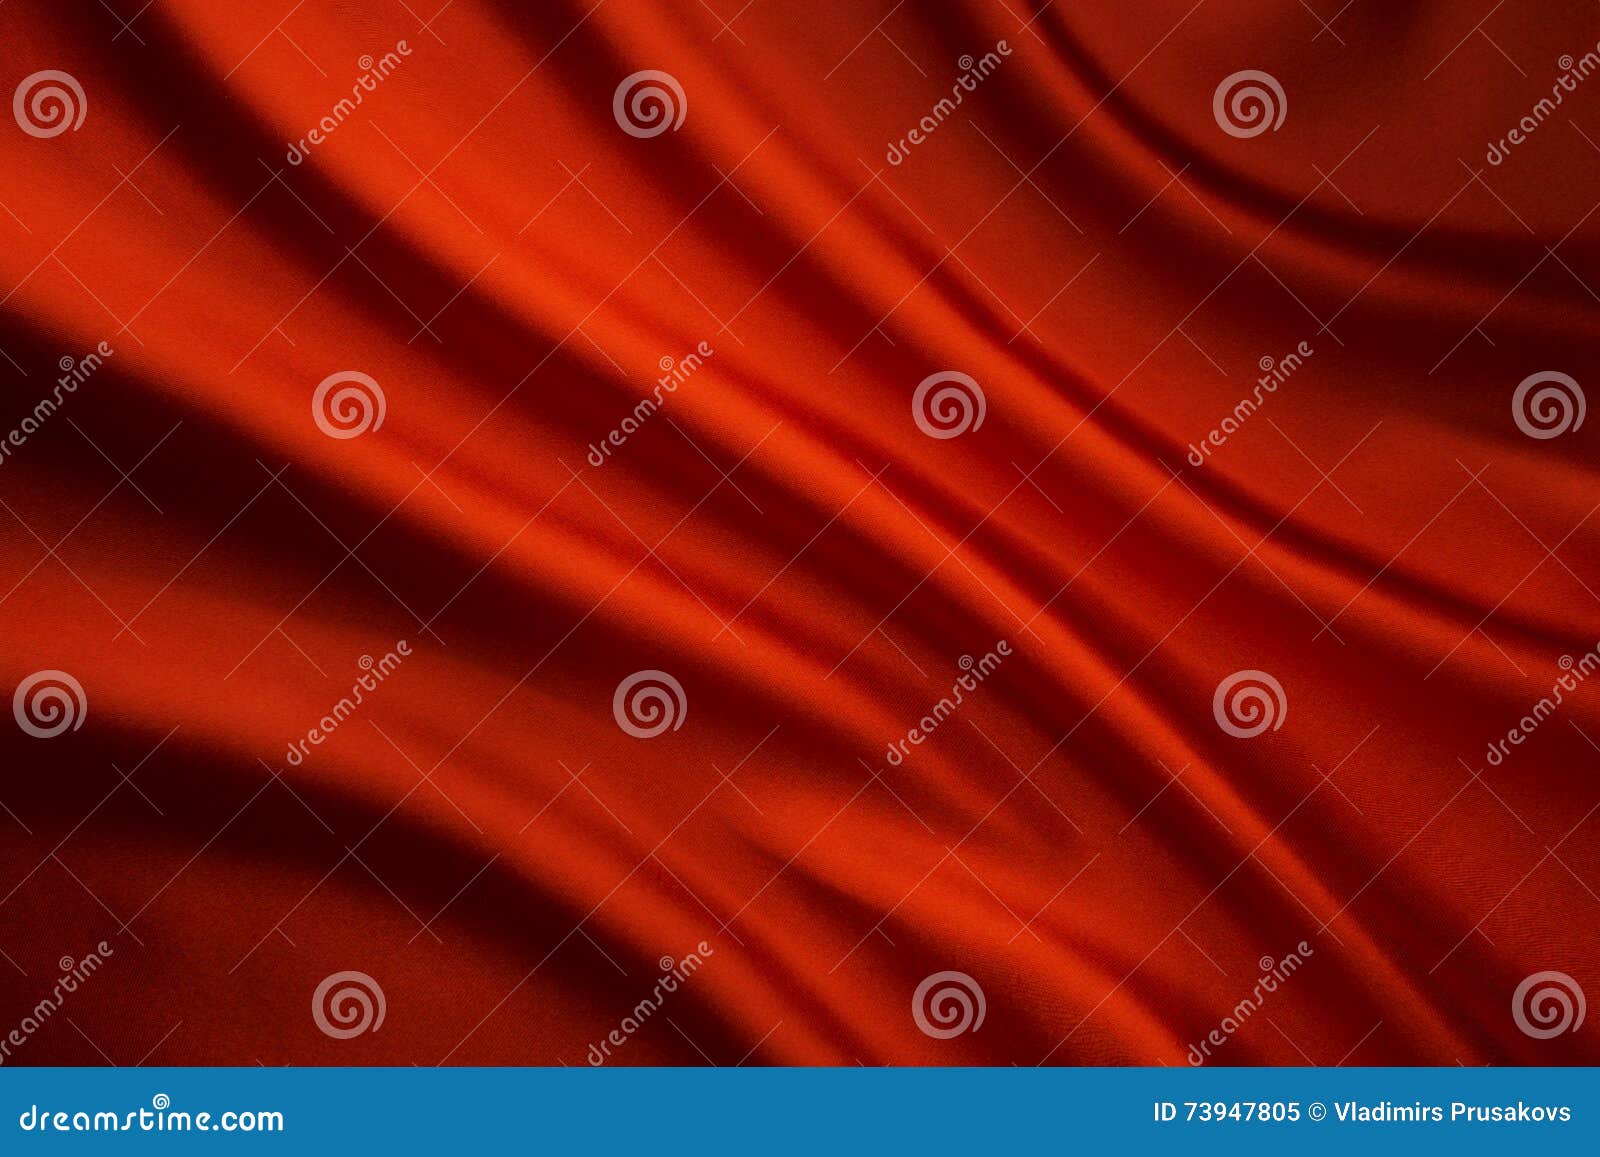 silk fabric wave background, abstract red satin cloth texture